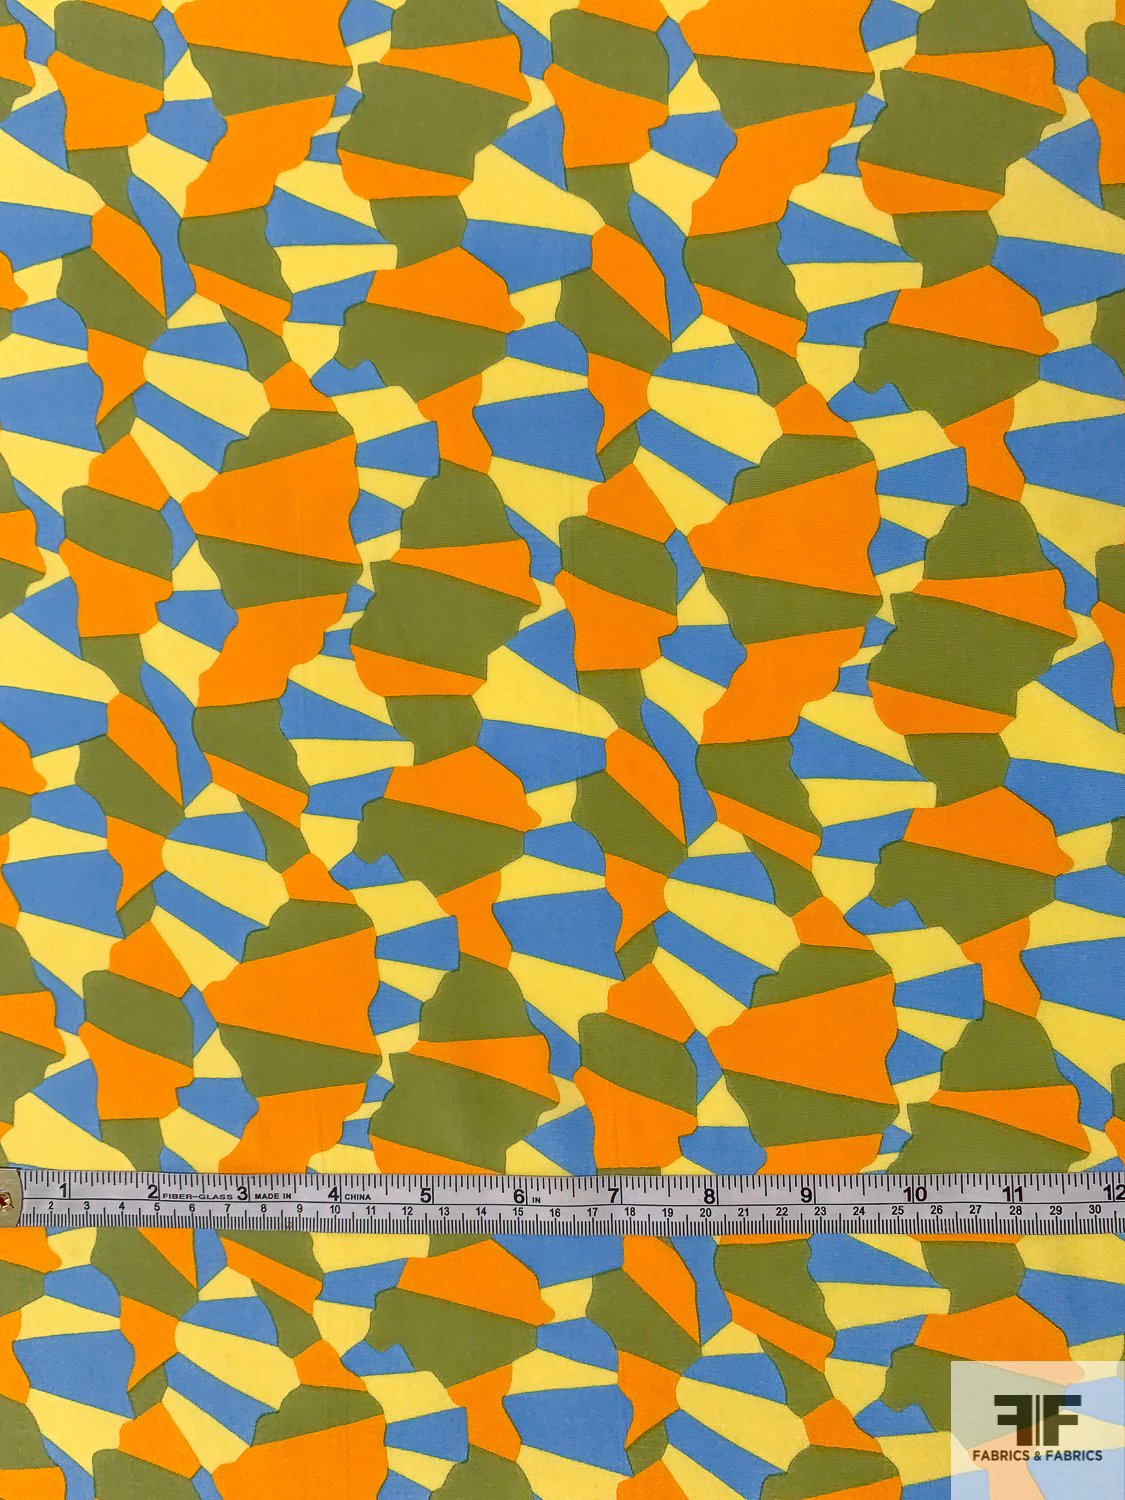 Graphic Printed Silk Crepe de Chine - Butter Yellow / Orange / Olive Green / Periwinkle Blue